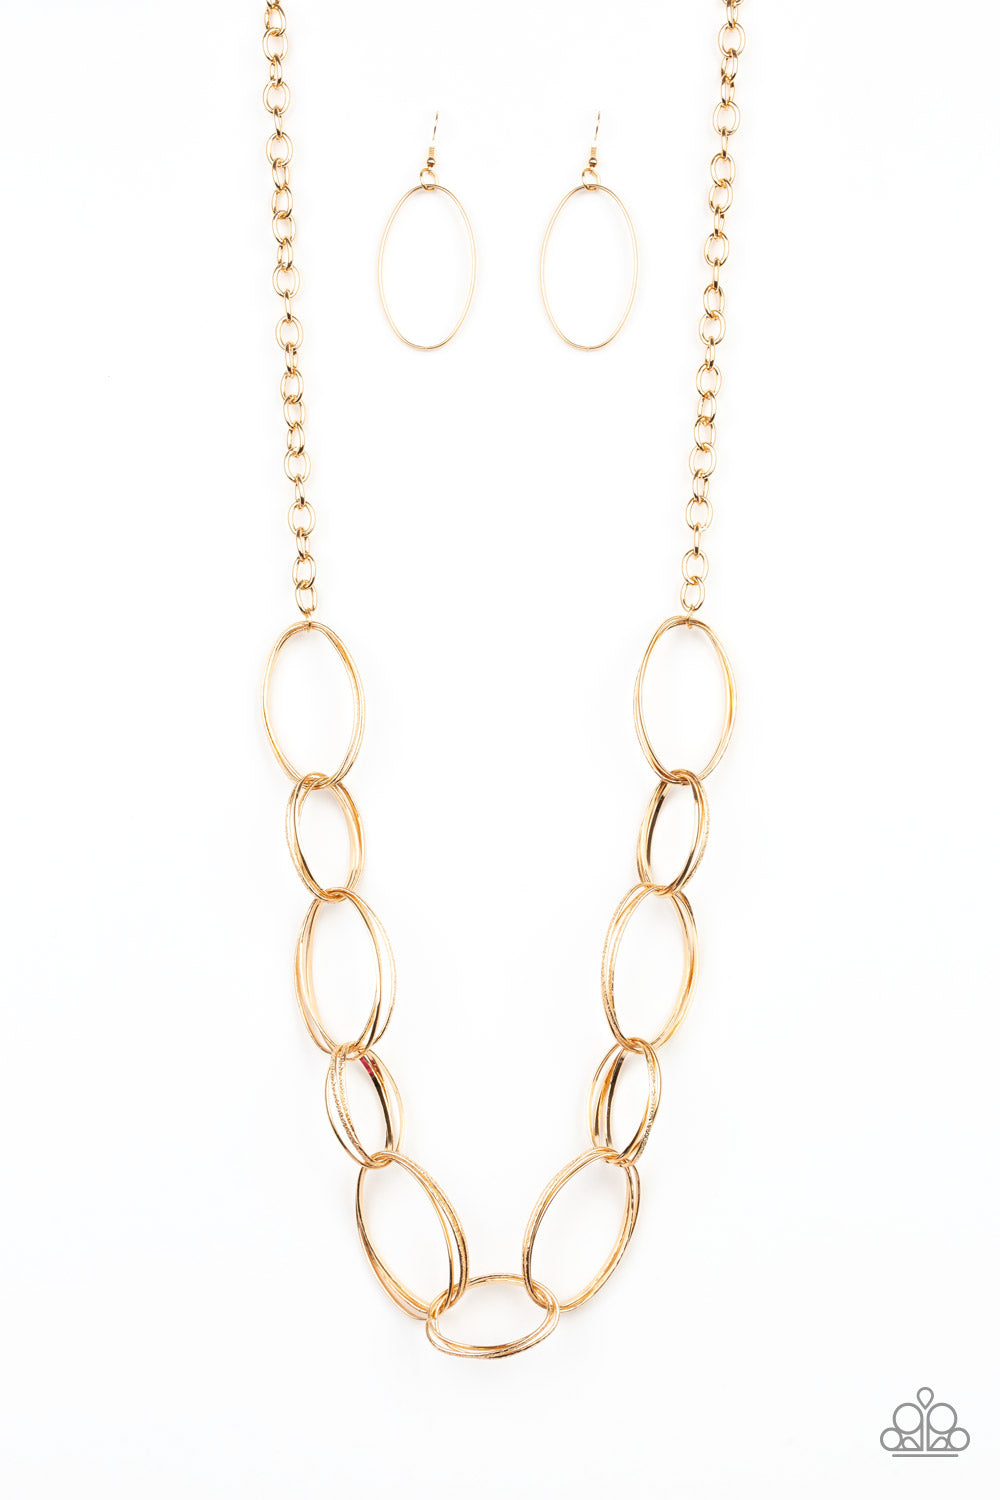 Ring Bling Necklace - Gold